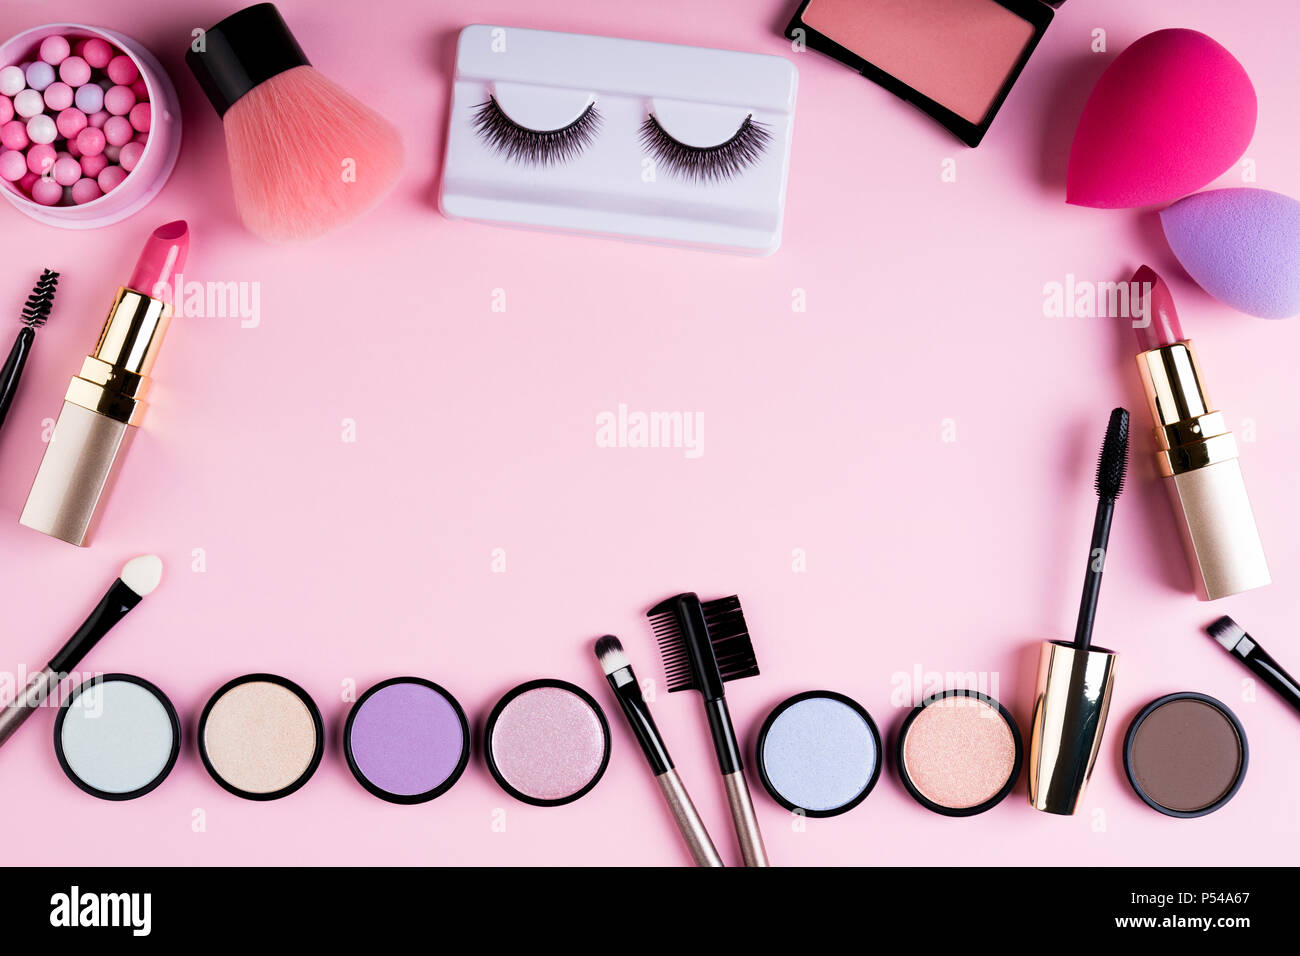 Makeup products and decorative cosmetics on pink background flat lay. Fashion and beauty blogging concept. Top view, copy space Stock Photo